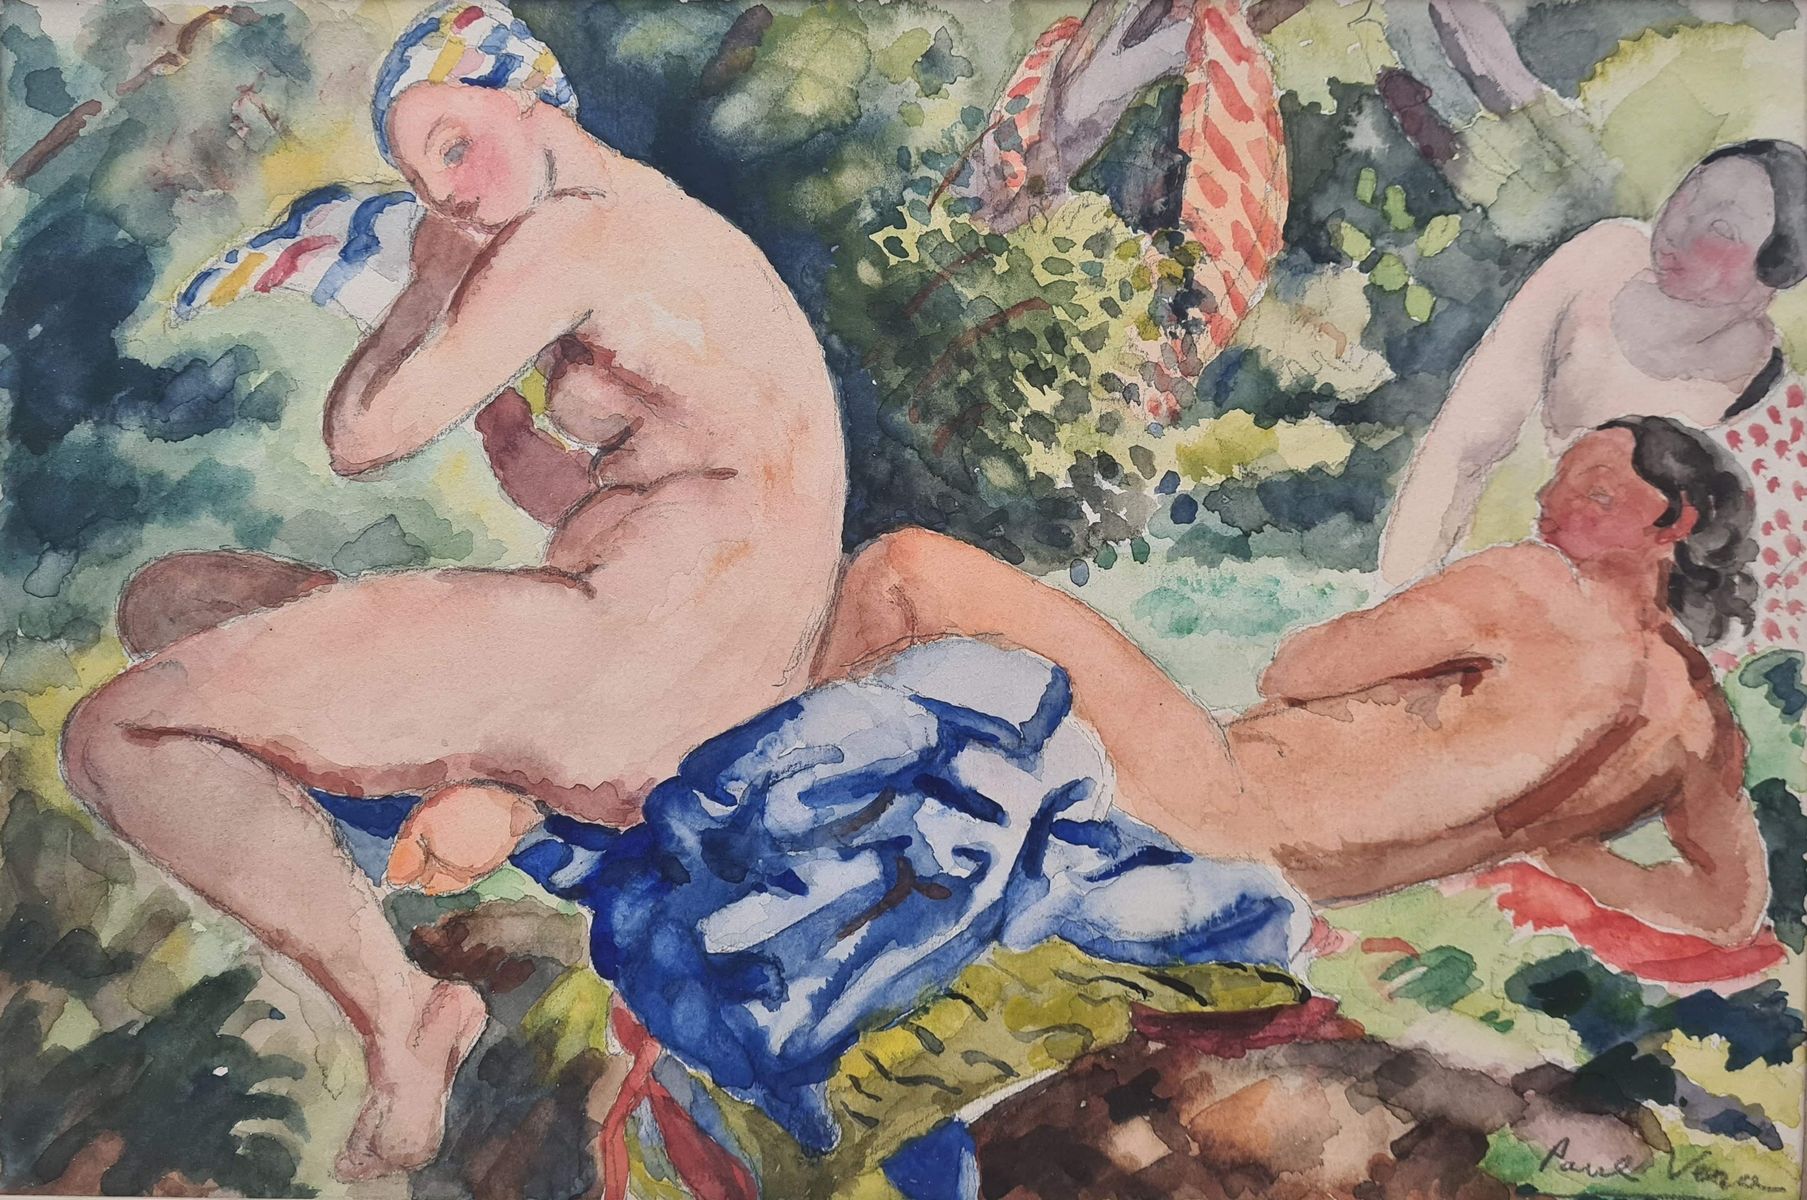 Null VERA Paul, 1882-1957
Bathers
watercolor
signed lower right
23 x 32 cm